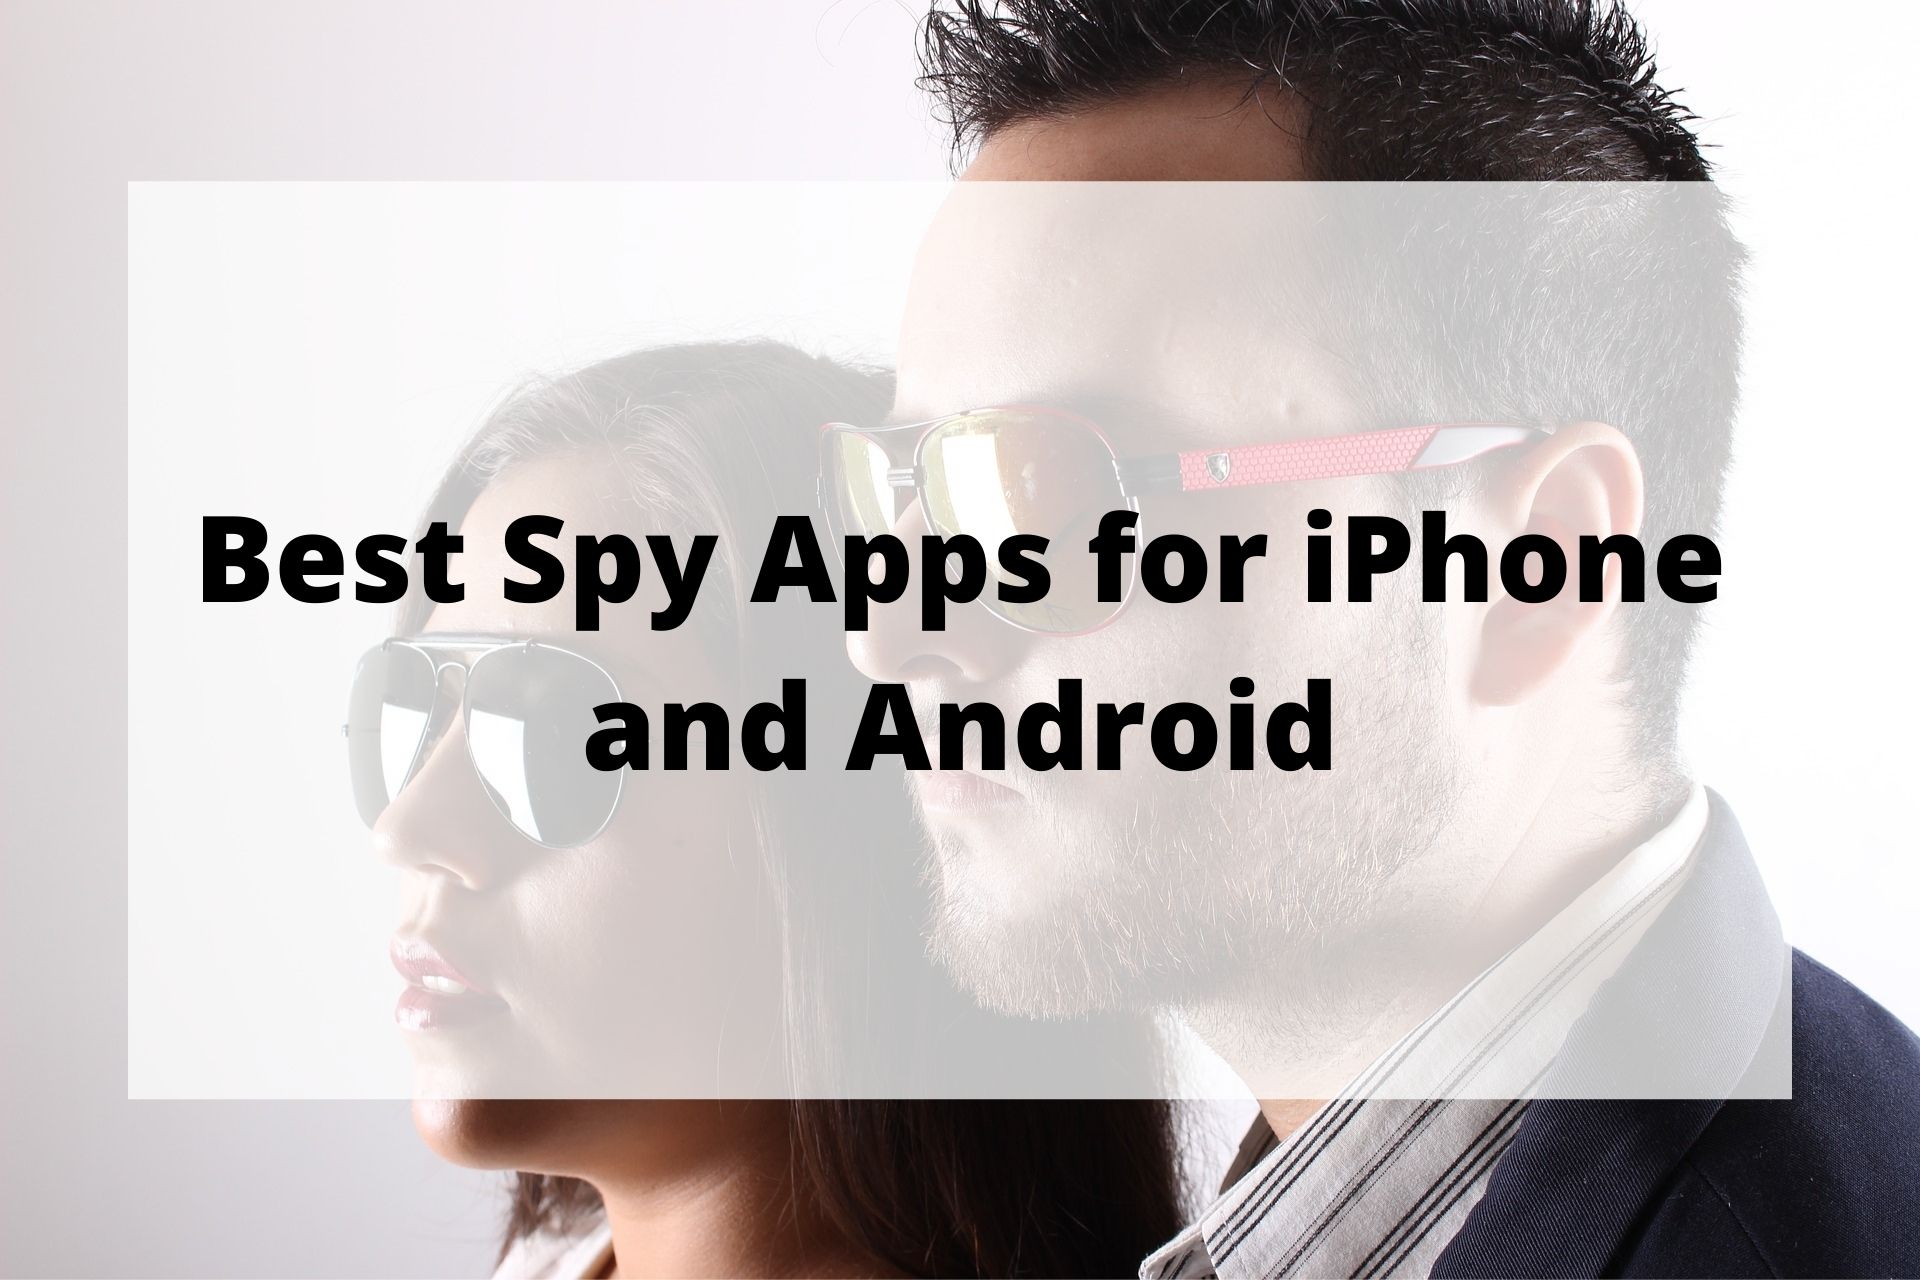 Best Spy Apps for iPhone and Android